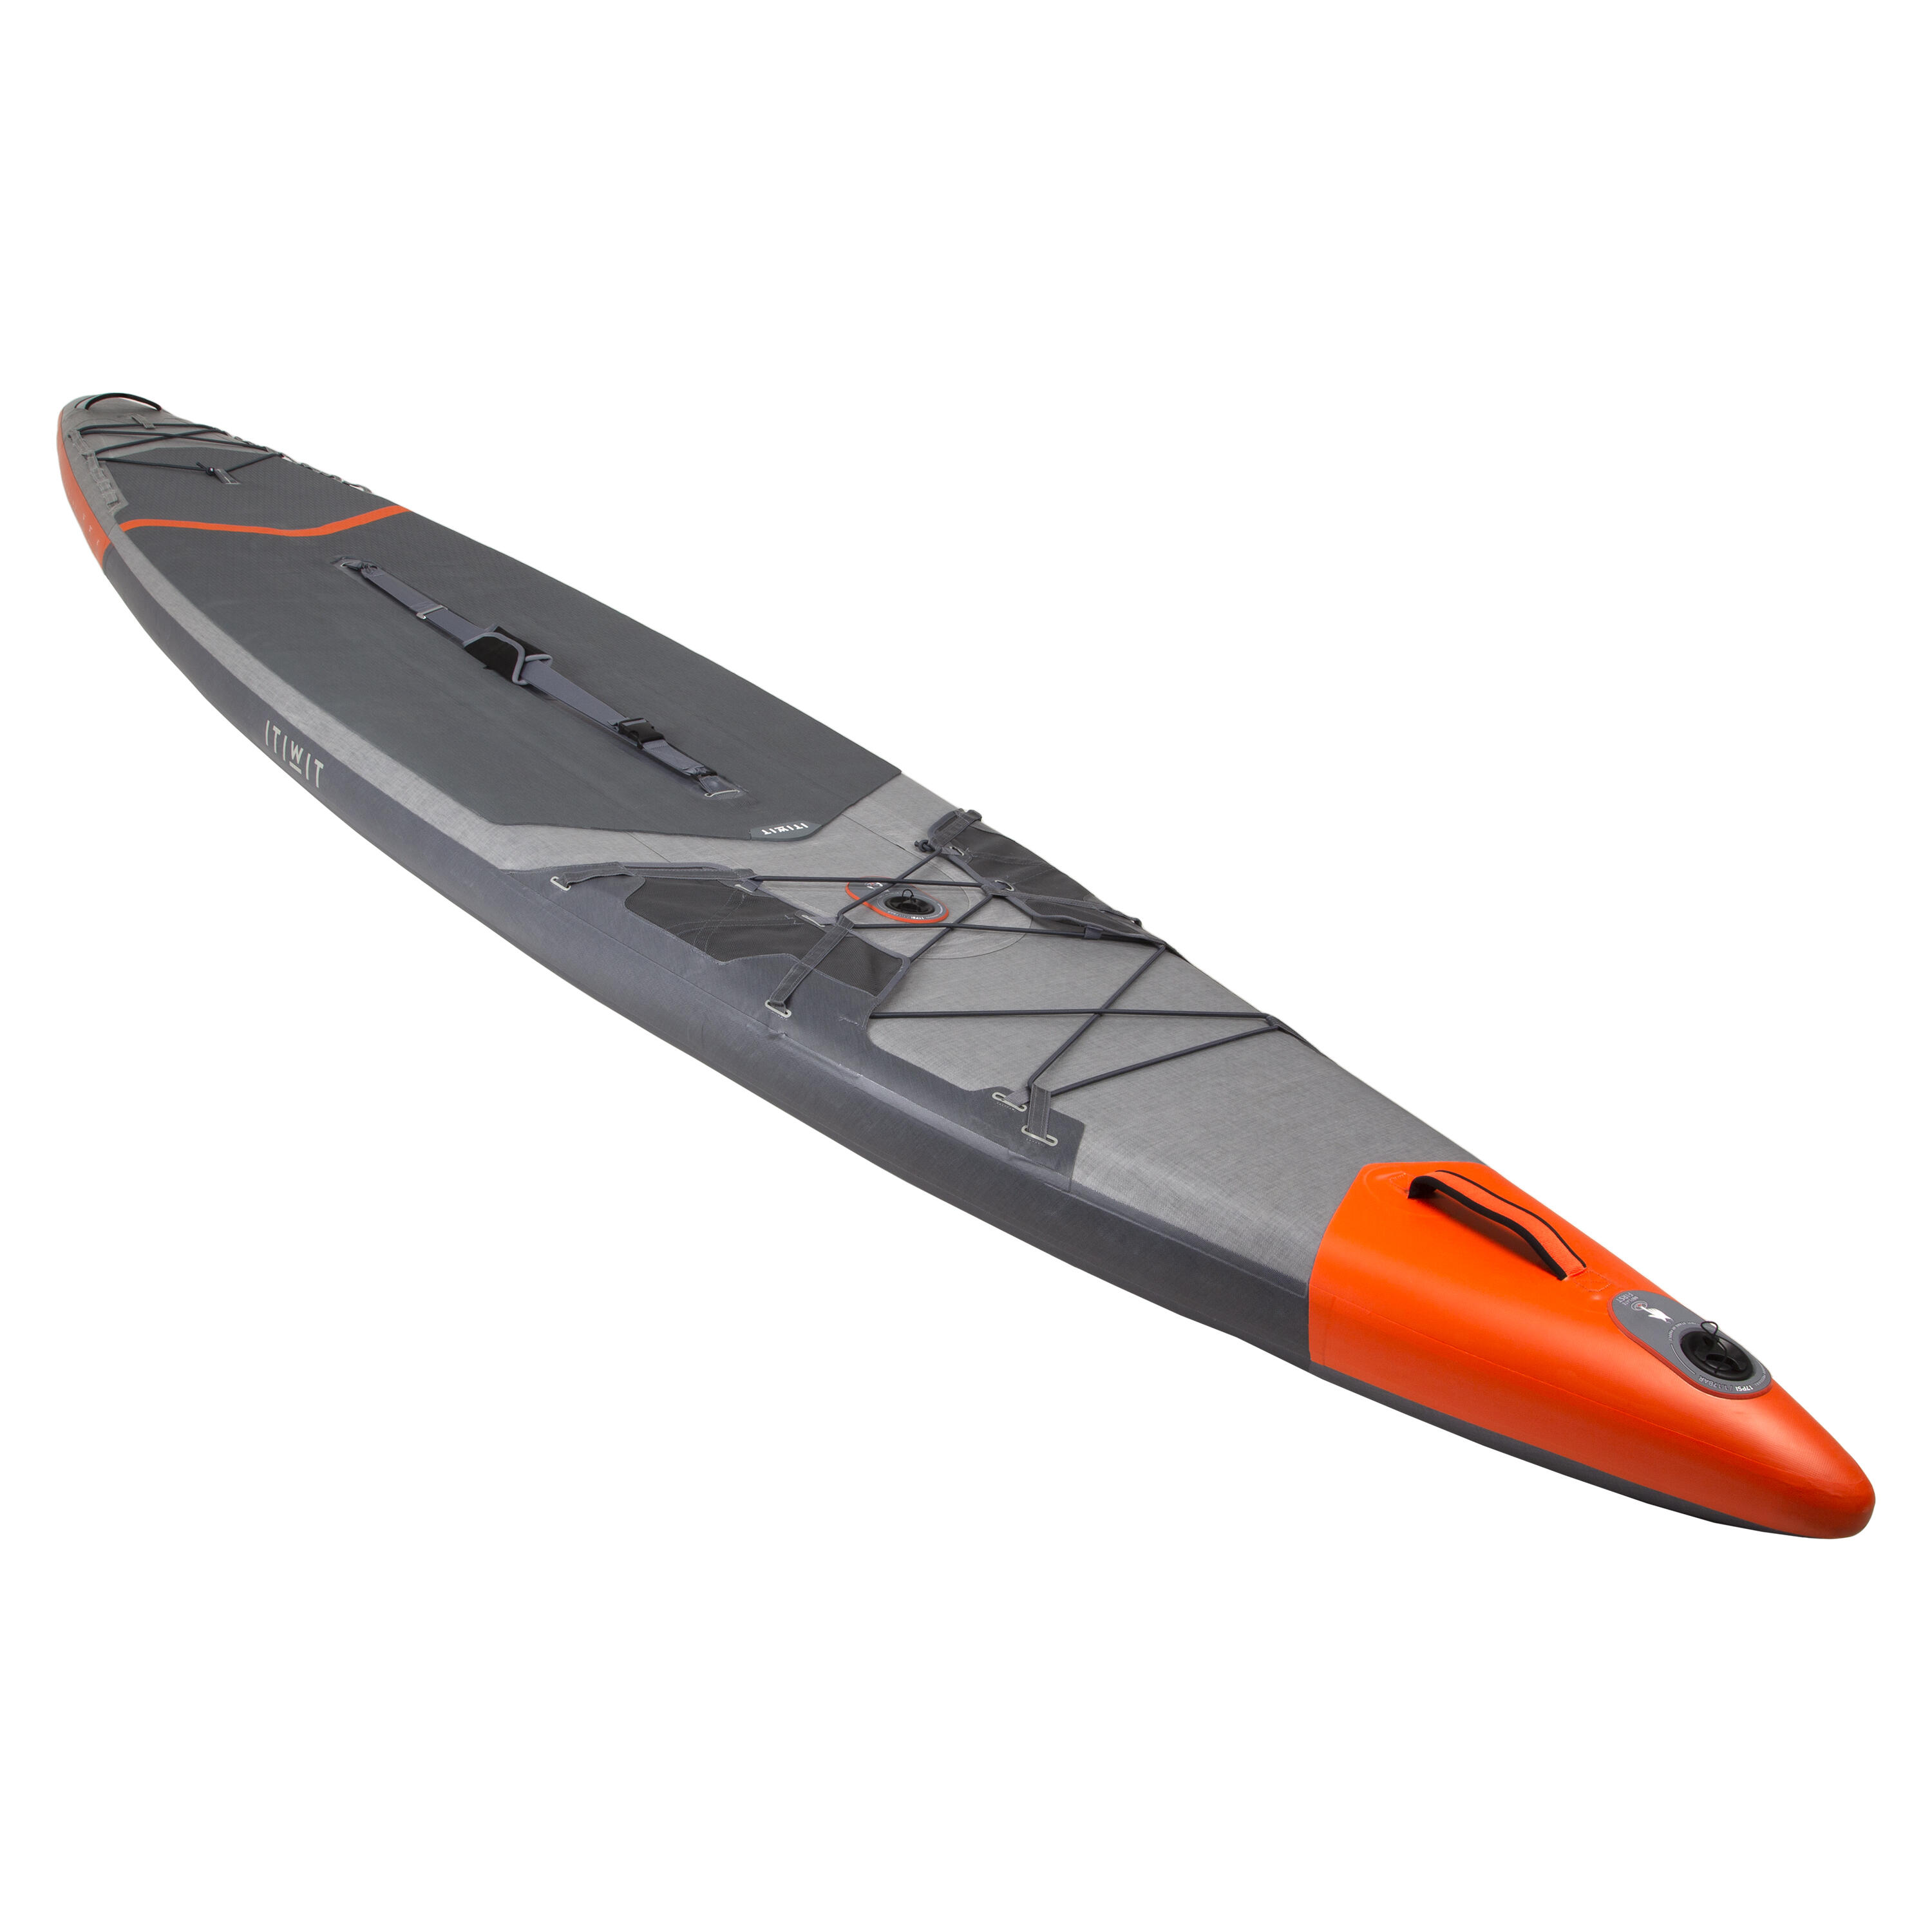 X900 14FT EXPEDITION INFLATABLE STAND-UP PADDLEBOARD (DOUBLE CHAMBER) 8/26